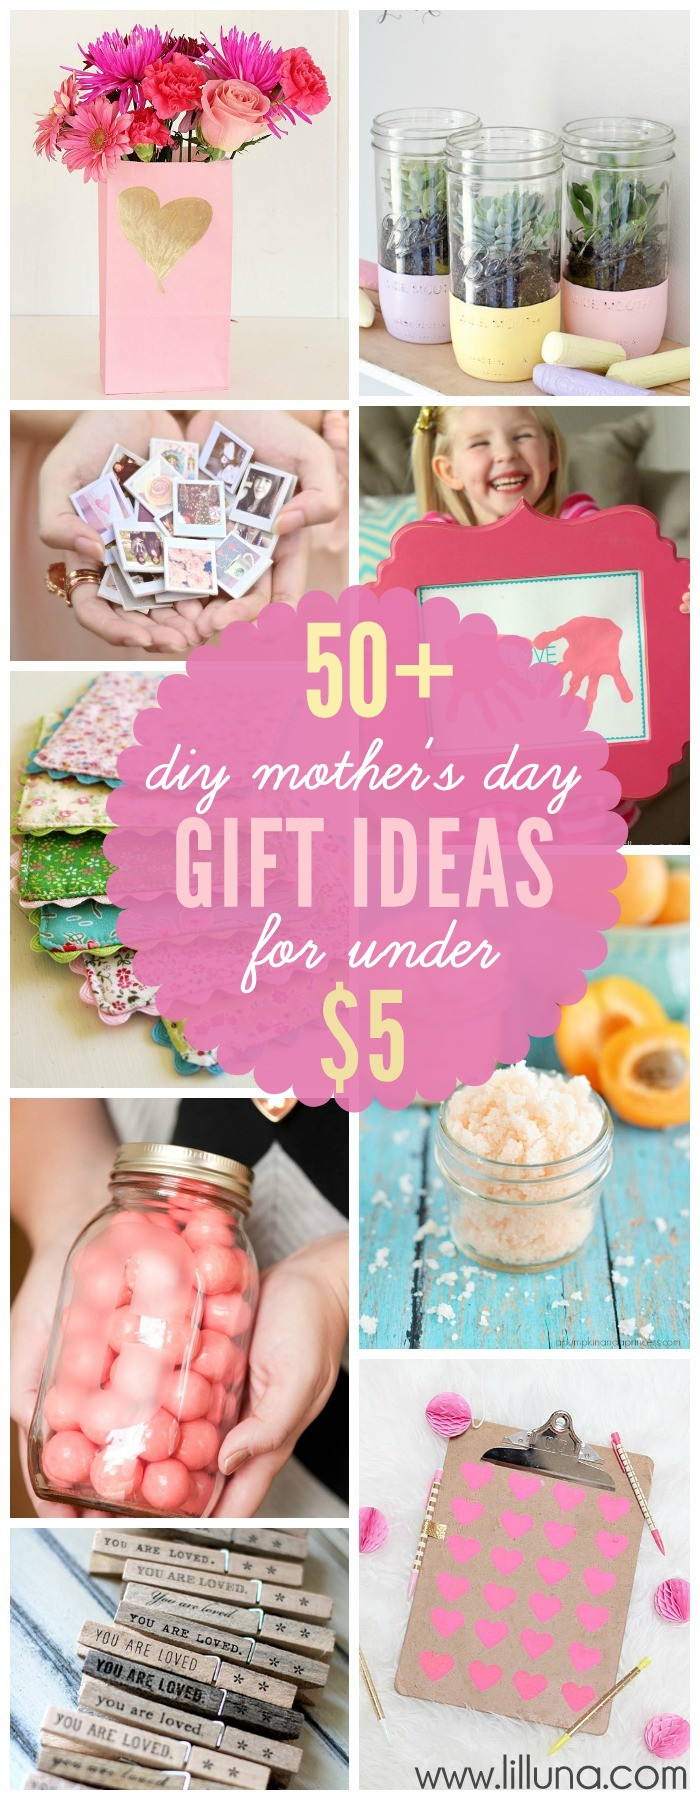 Mothers Da Gift Ideas
 Inexpensive DIY Mother s Day Gift Ideas